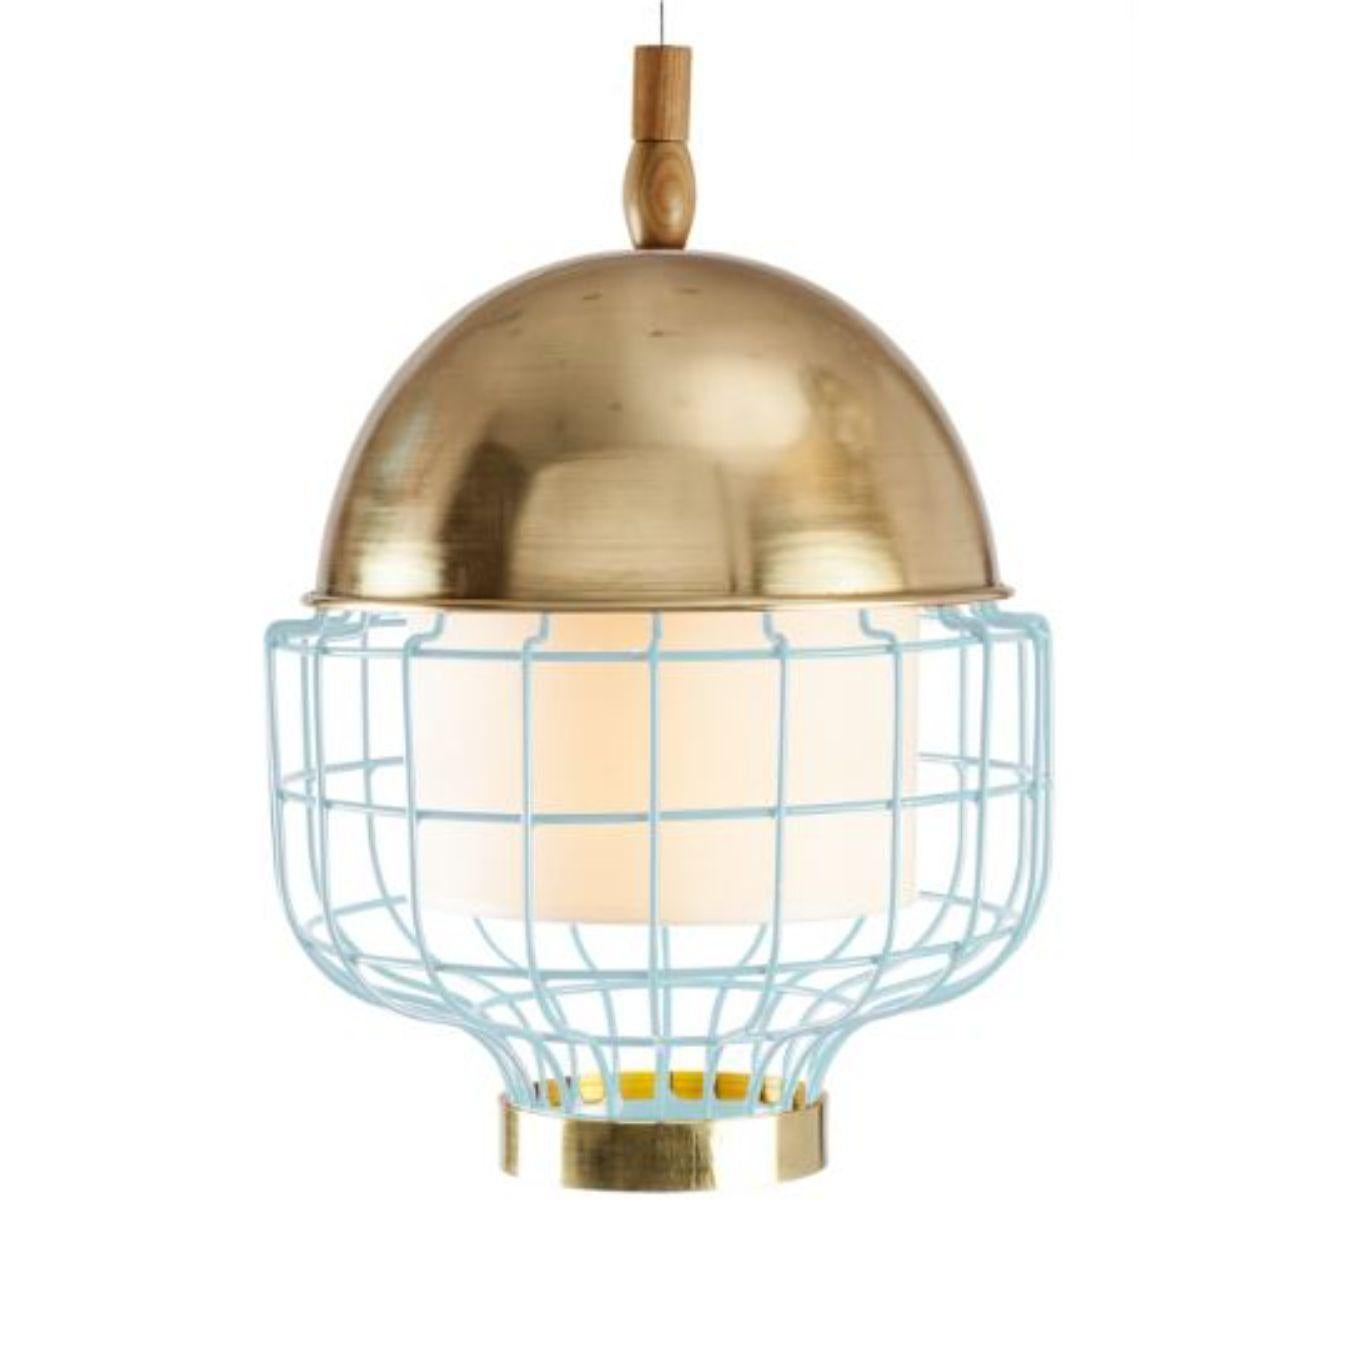 Brass Jade Magnolia III suspension lamp with brass ring by Dooq.
Dimensions: W 31 x D 31 x H 42 cm.
Materials: lacquered metal, polished or brushed metal, brass.
Abat-jour: cotton
Also available in different colours and